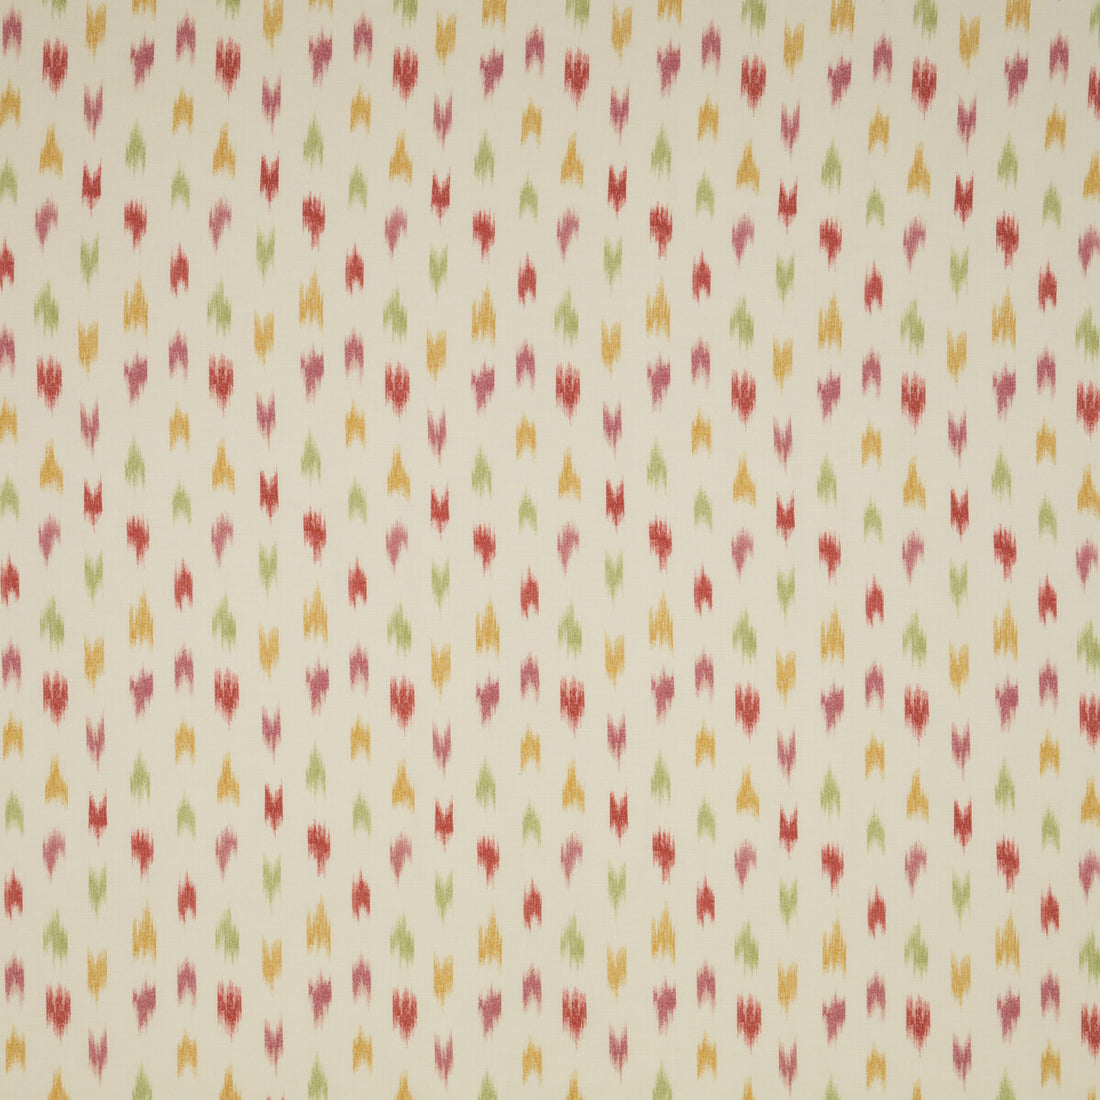 Bombay Ikat fabric in red/pink color - pattern 8018124.719.0 - by Brunschwig &amp; Fils in the Cevennes collection